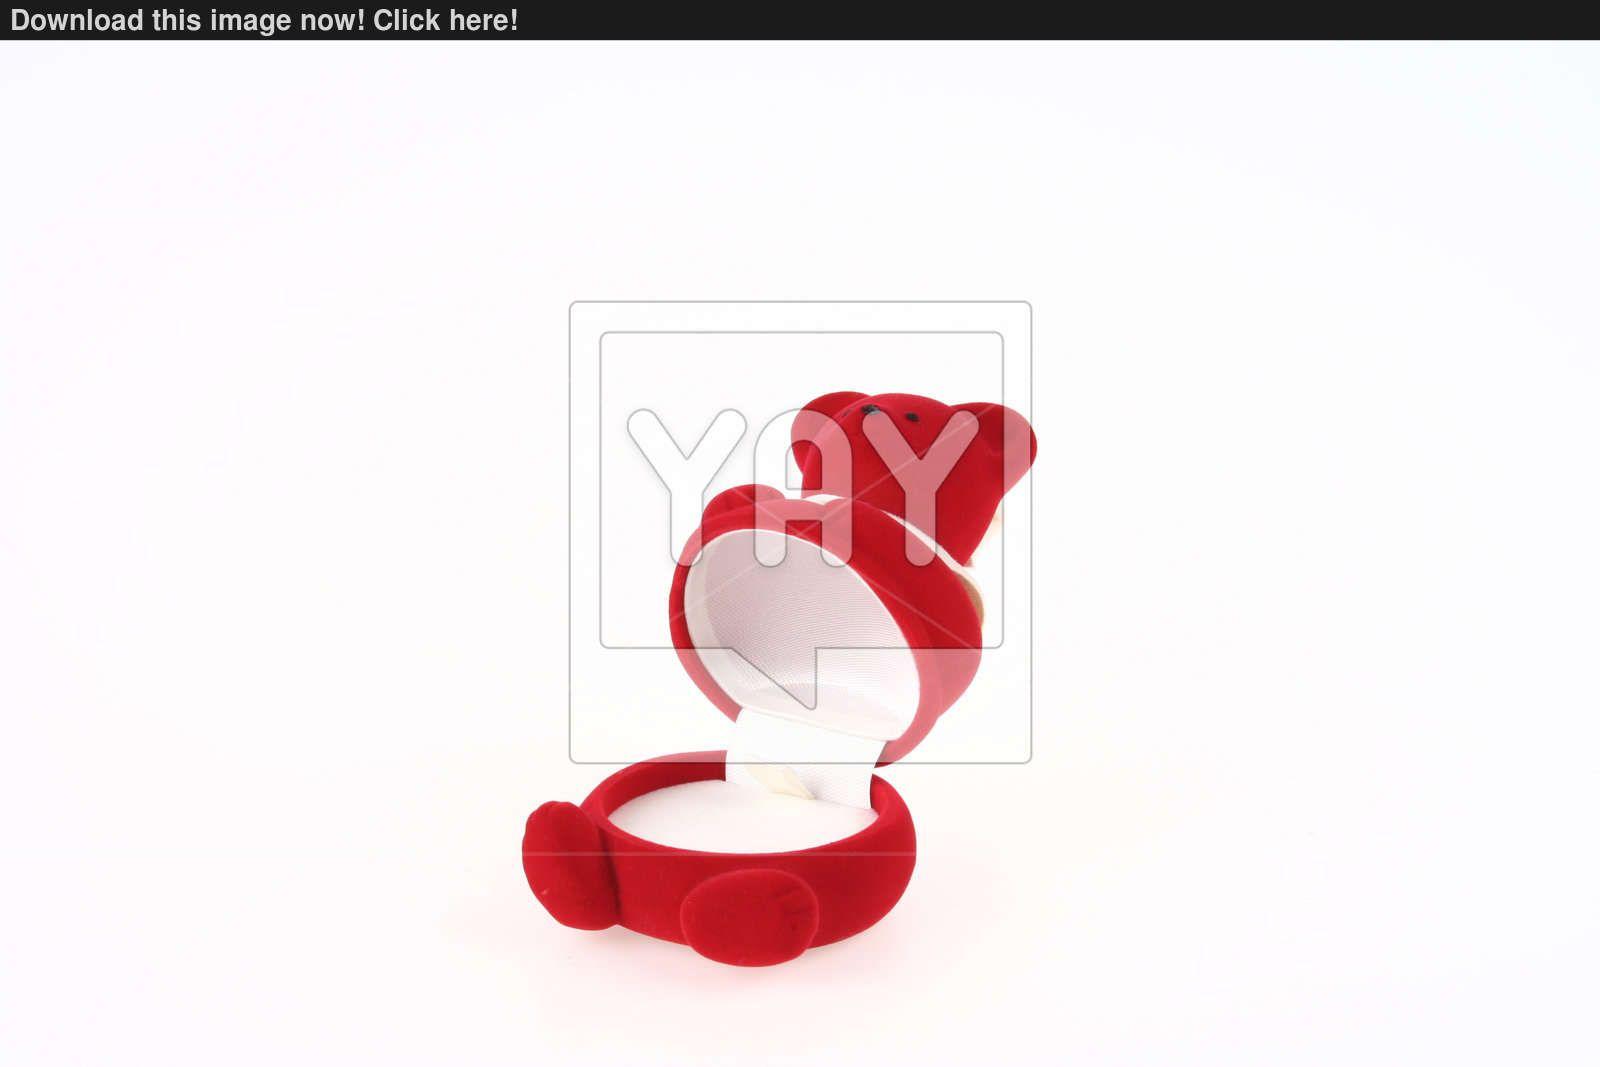 Empty Red Boxes Logo - Opened Empty Red Bear Ring Box image | YayImages.com